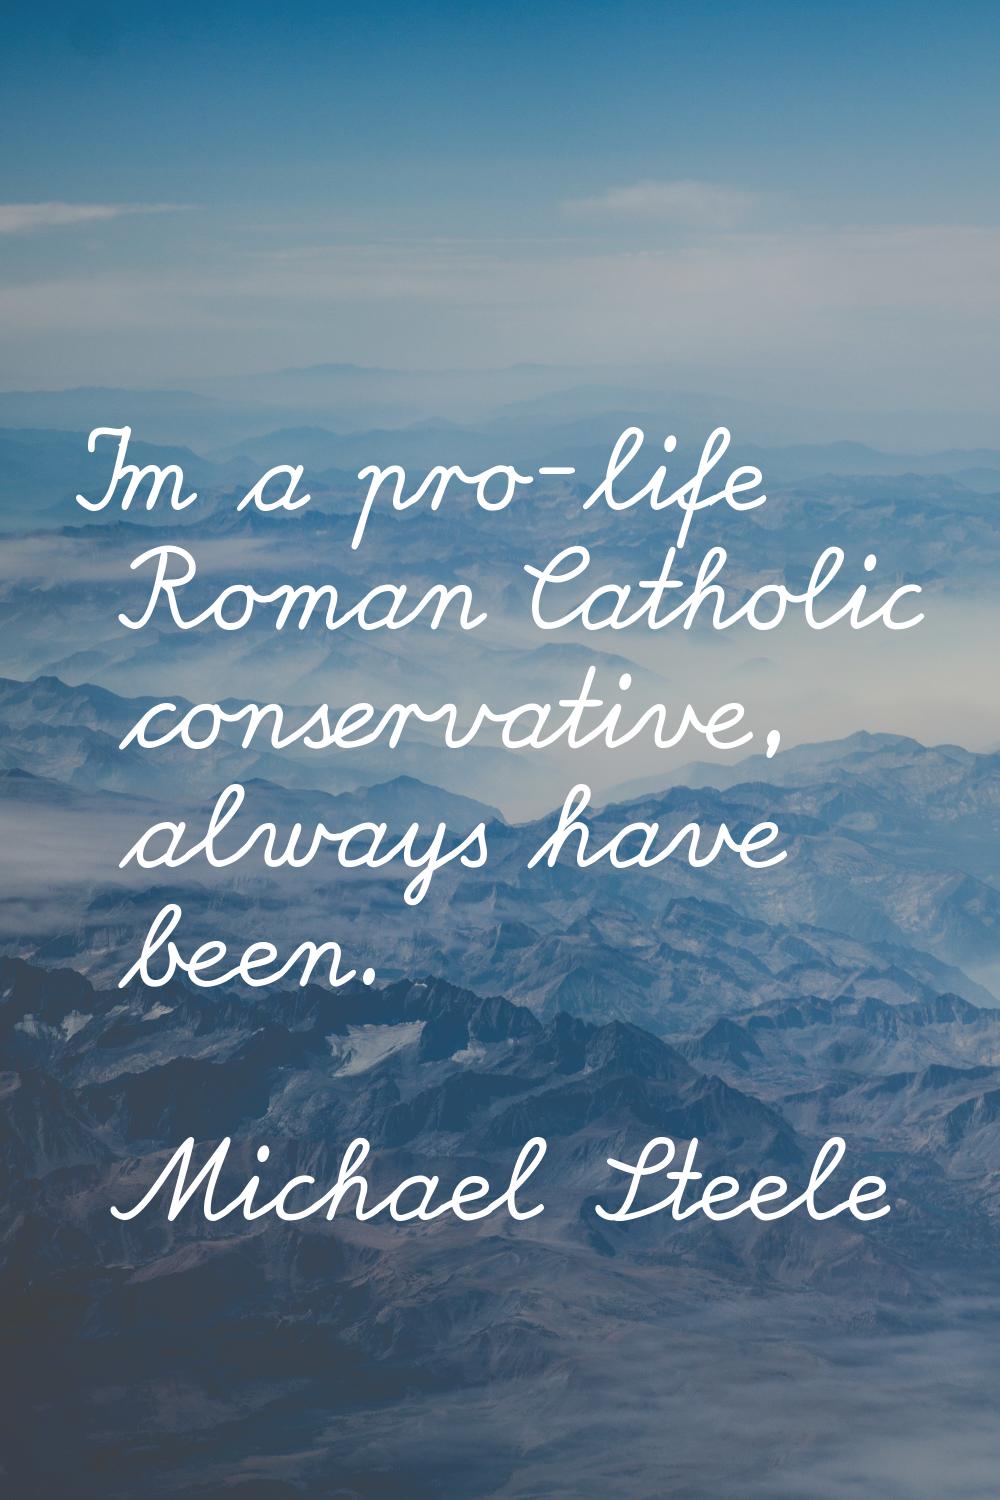 I'm a pro-life Roman Catholic conservative, always have been.